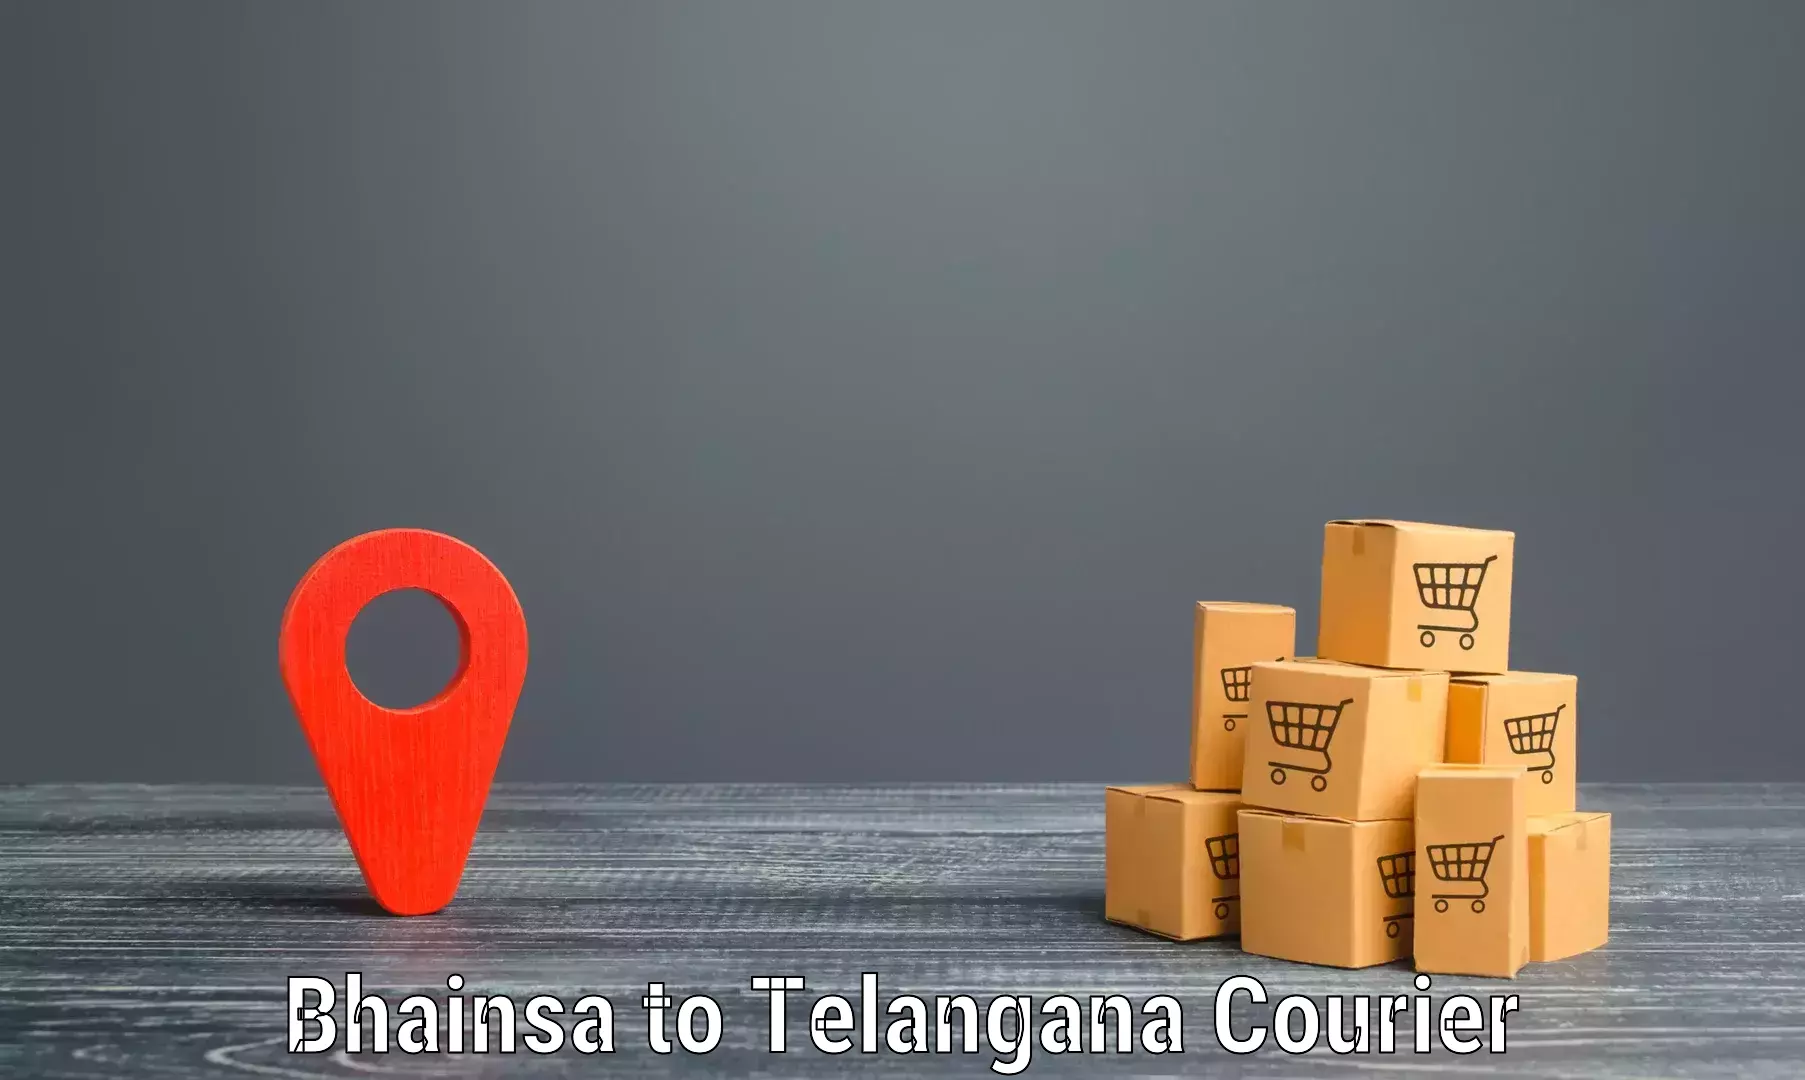 Reliable delivery network Bhainsa to Dubbak